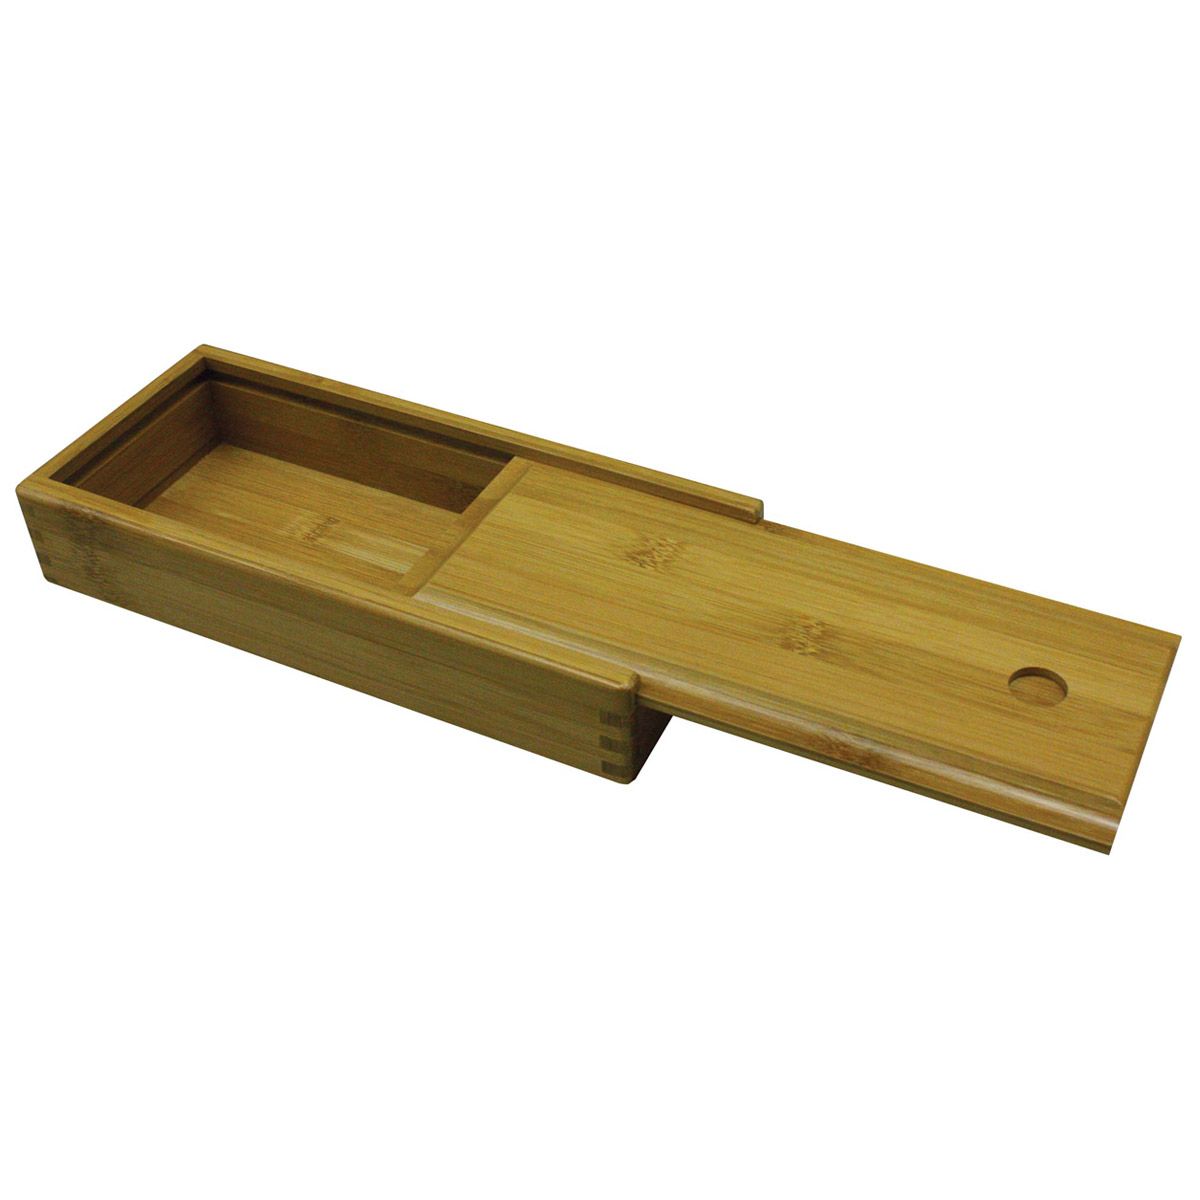 Bamboo Wood Box With Sliding Lid - 1.25 x 4 x 10.5 inches